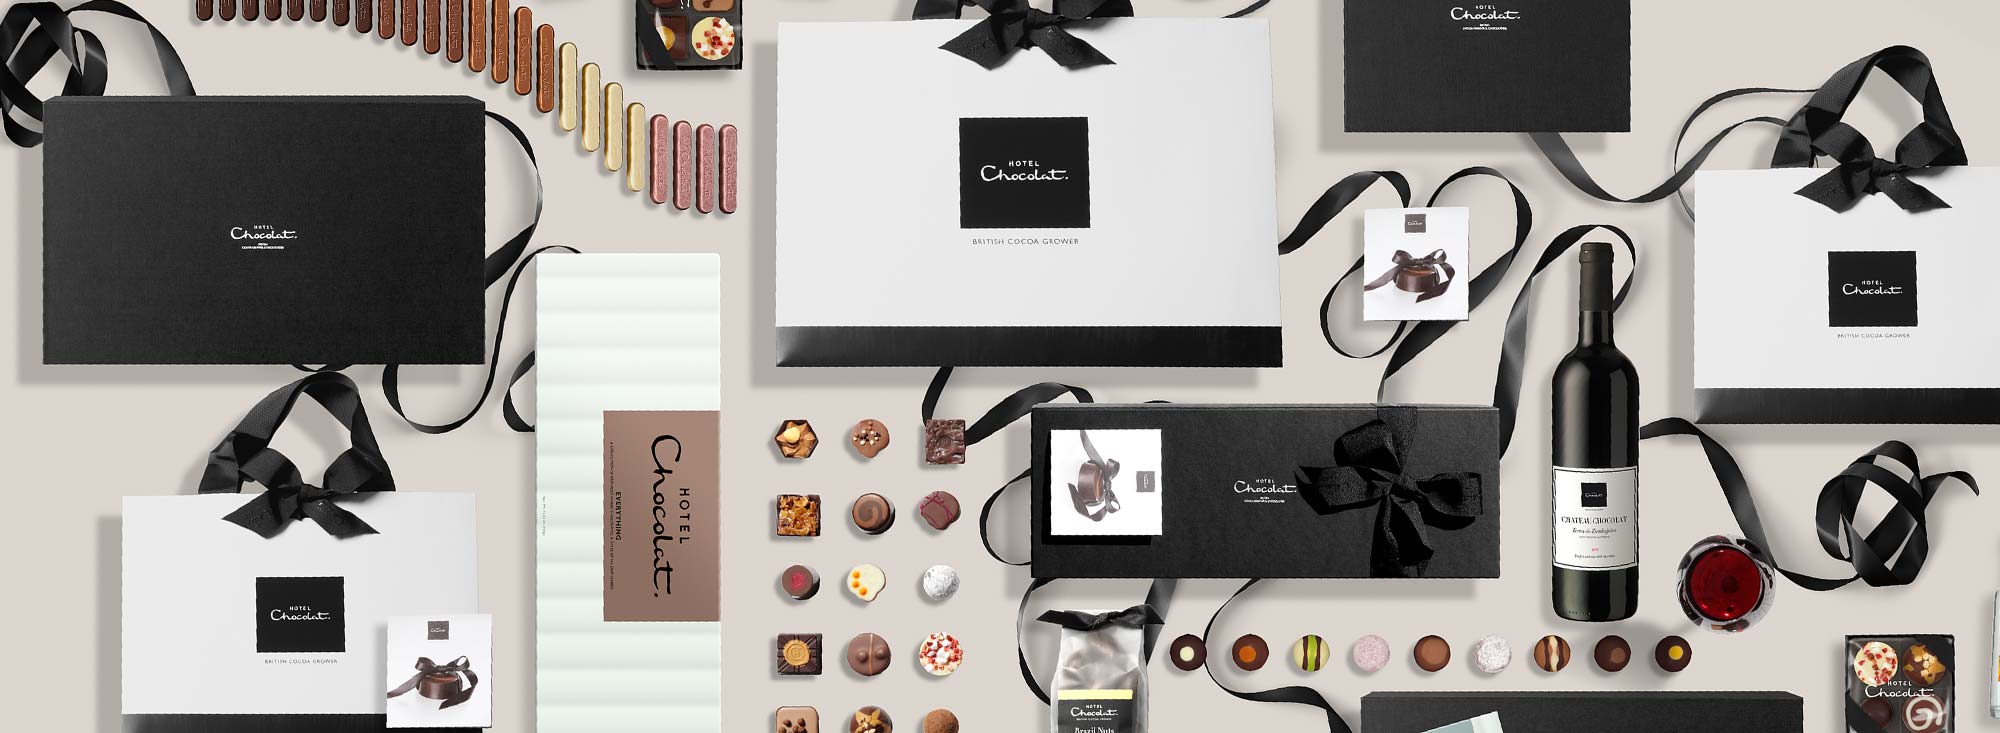 Hotel Chocolat Business Gifts